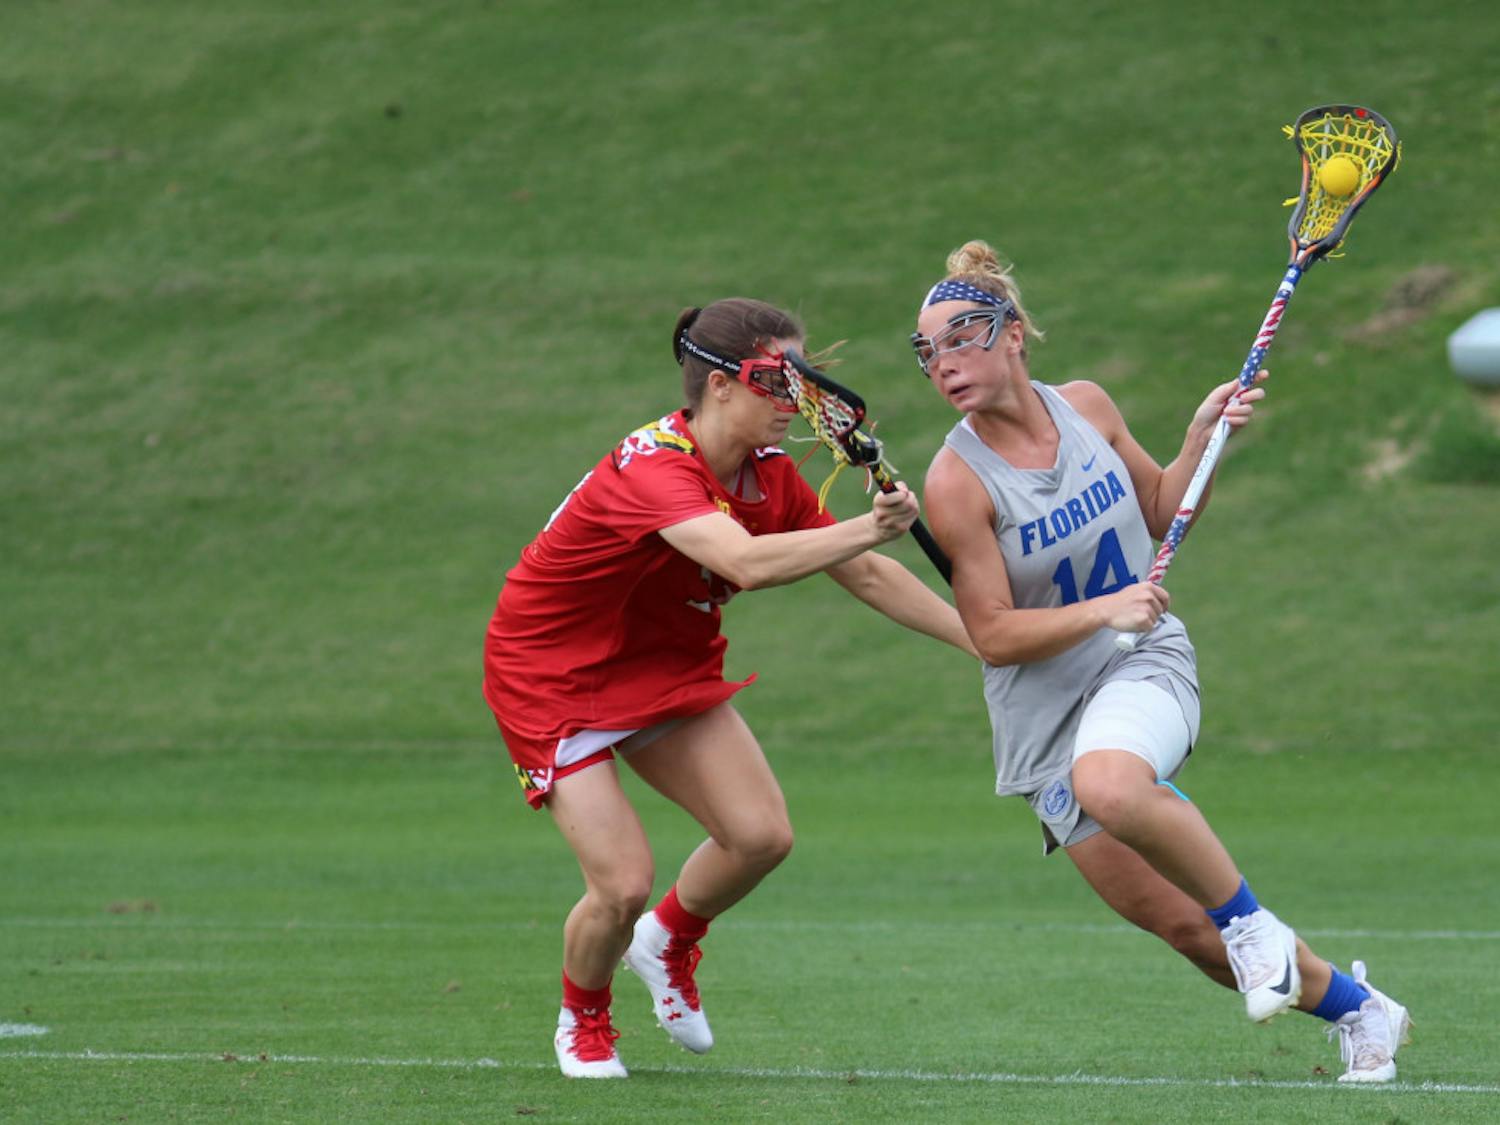 Florida attacker Lindsey Ronbeck scored four goals during UF’s 16-9 road win over Colorado. 